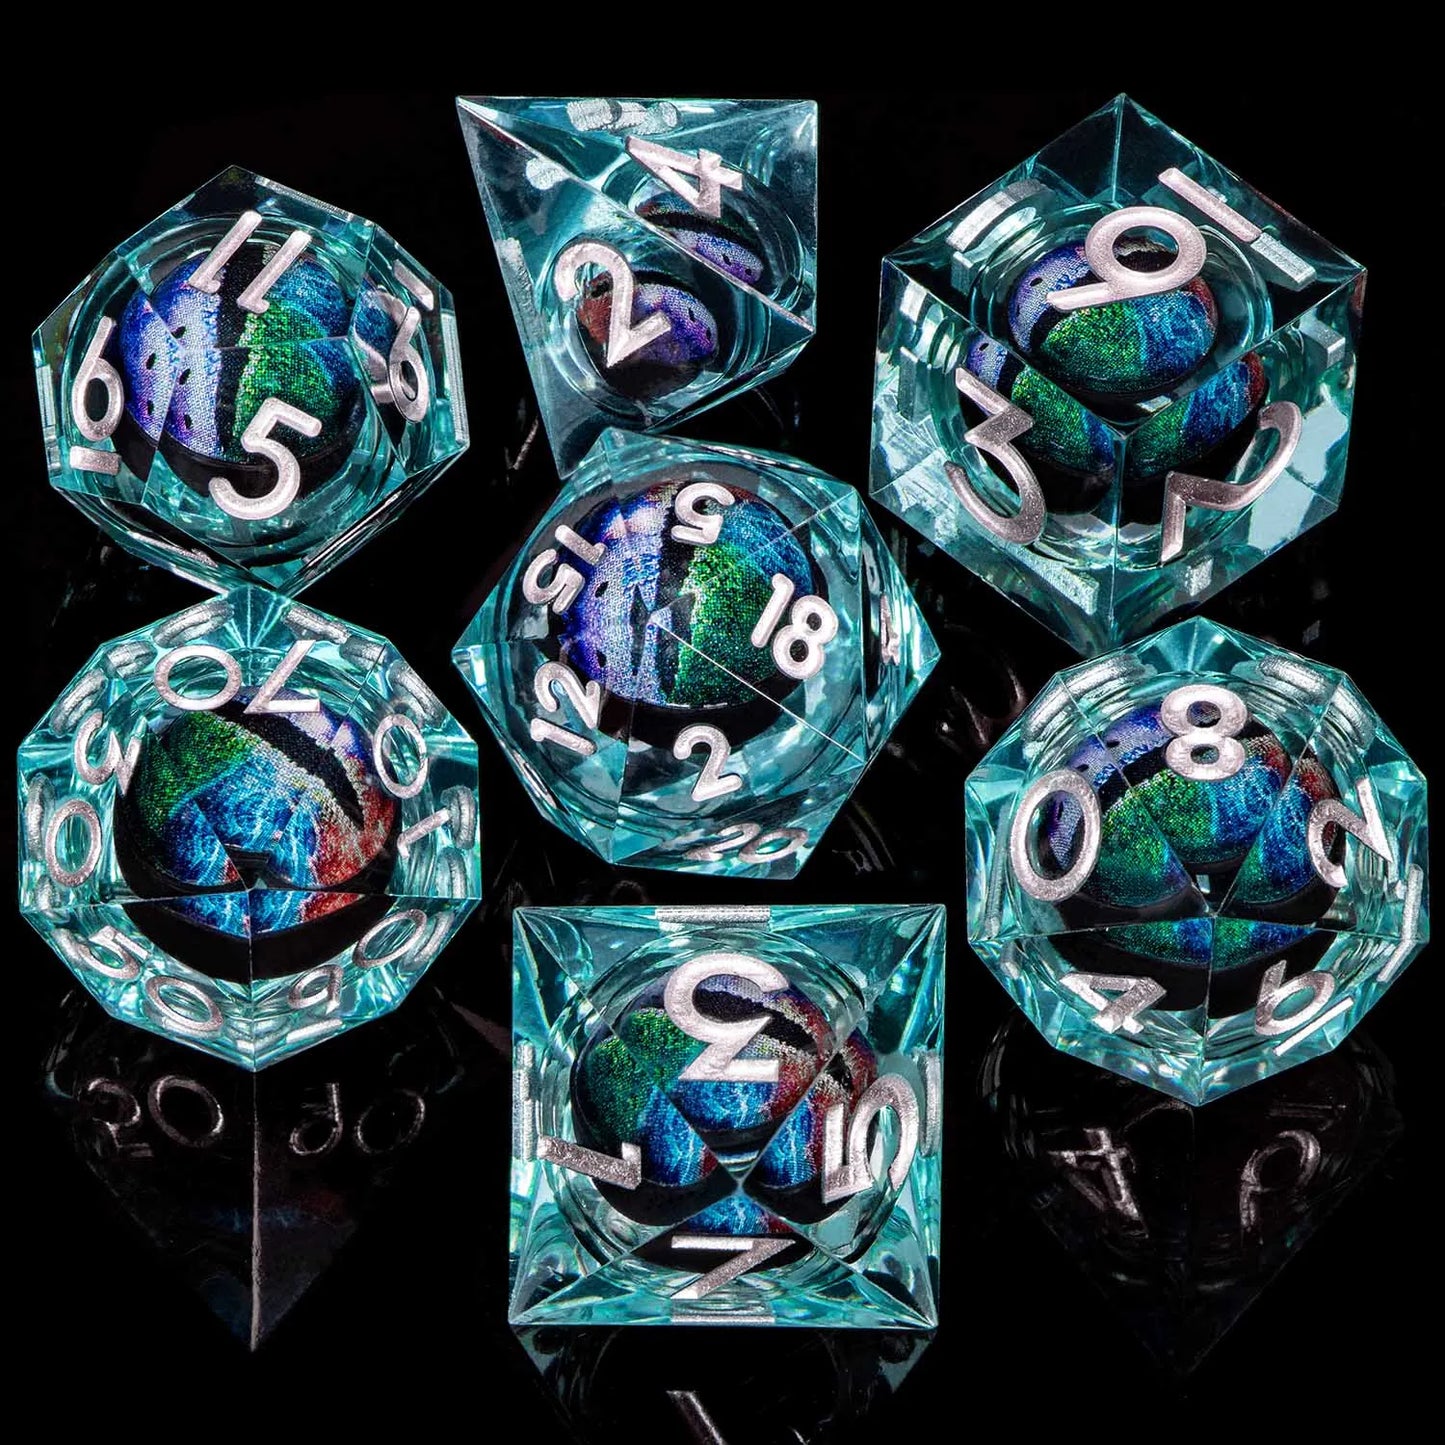 ORIFANTOU DND Red Rings & Liquid Flow Eye Sharp Edge Resin Dice Set D&D Dungeon and Dragon Handmade D20 D and D Polyhedral Dice YY-19